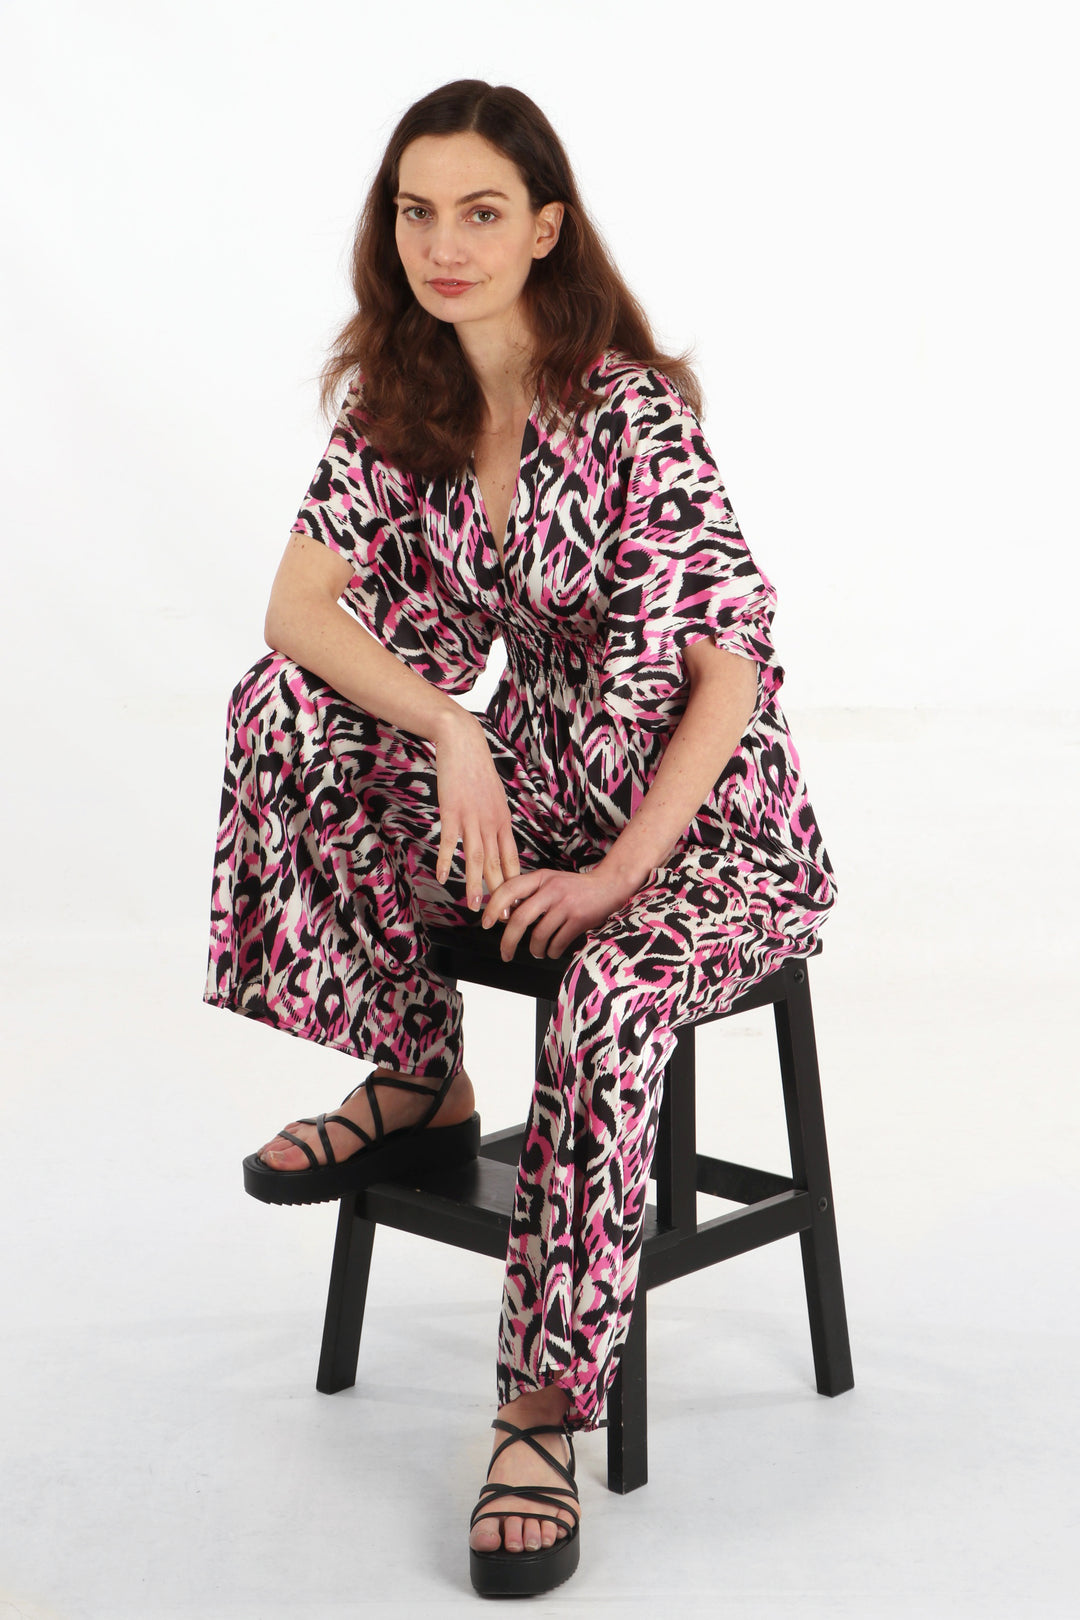 model seated wearing a pink abstract pattern jumpsuit with long flared trouser legs